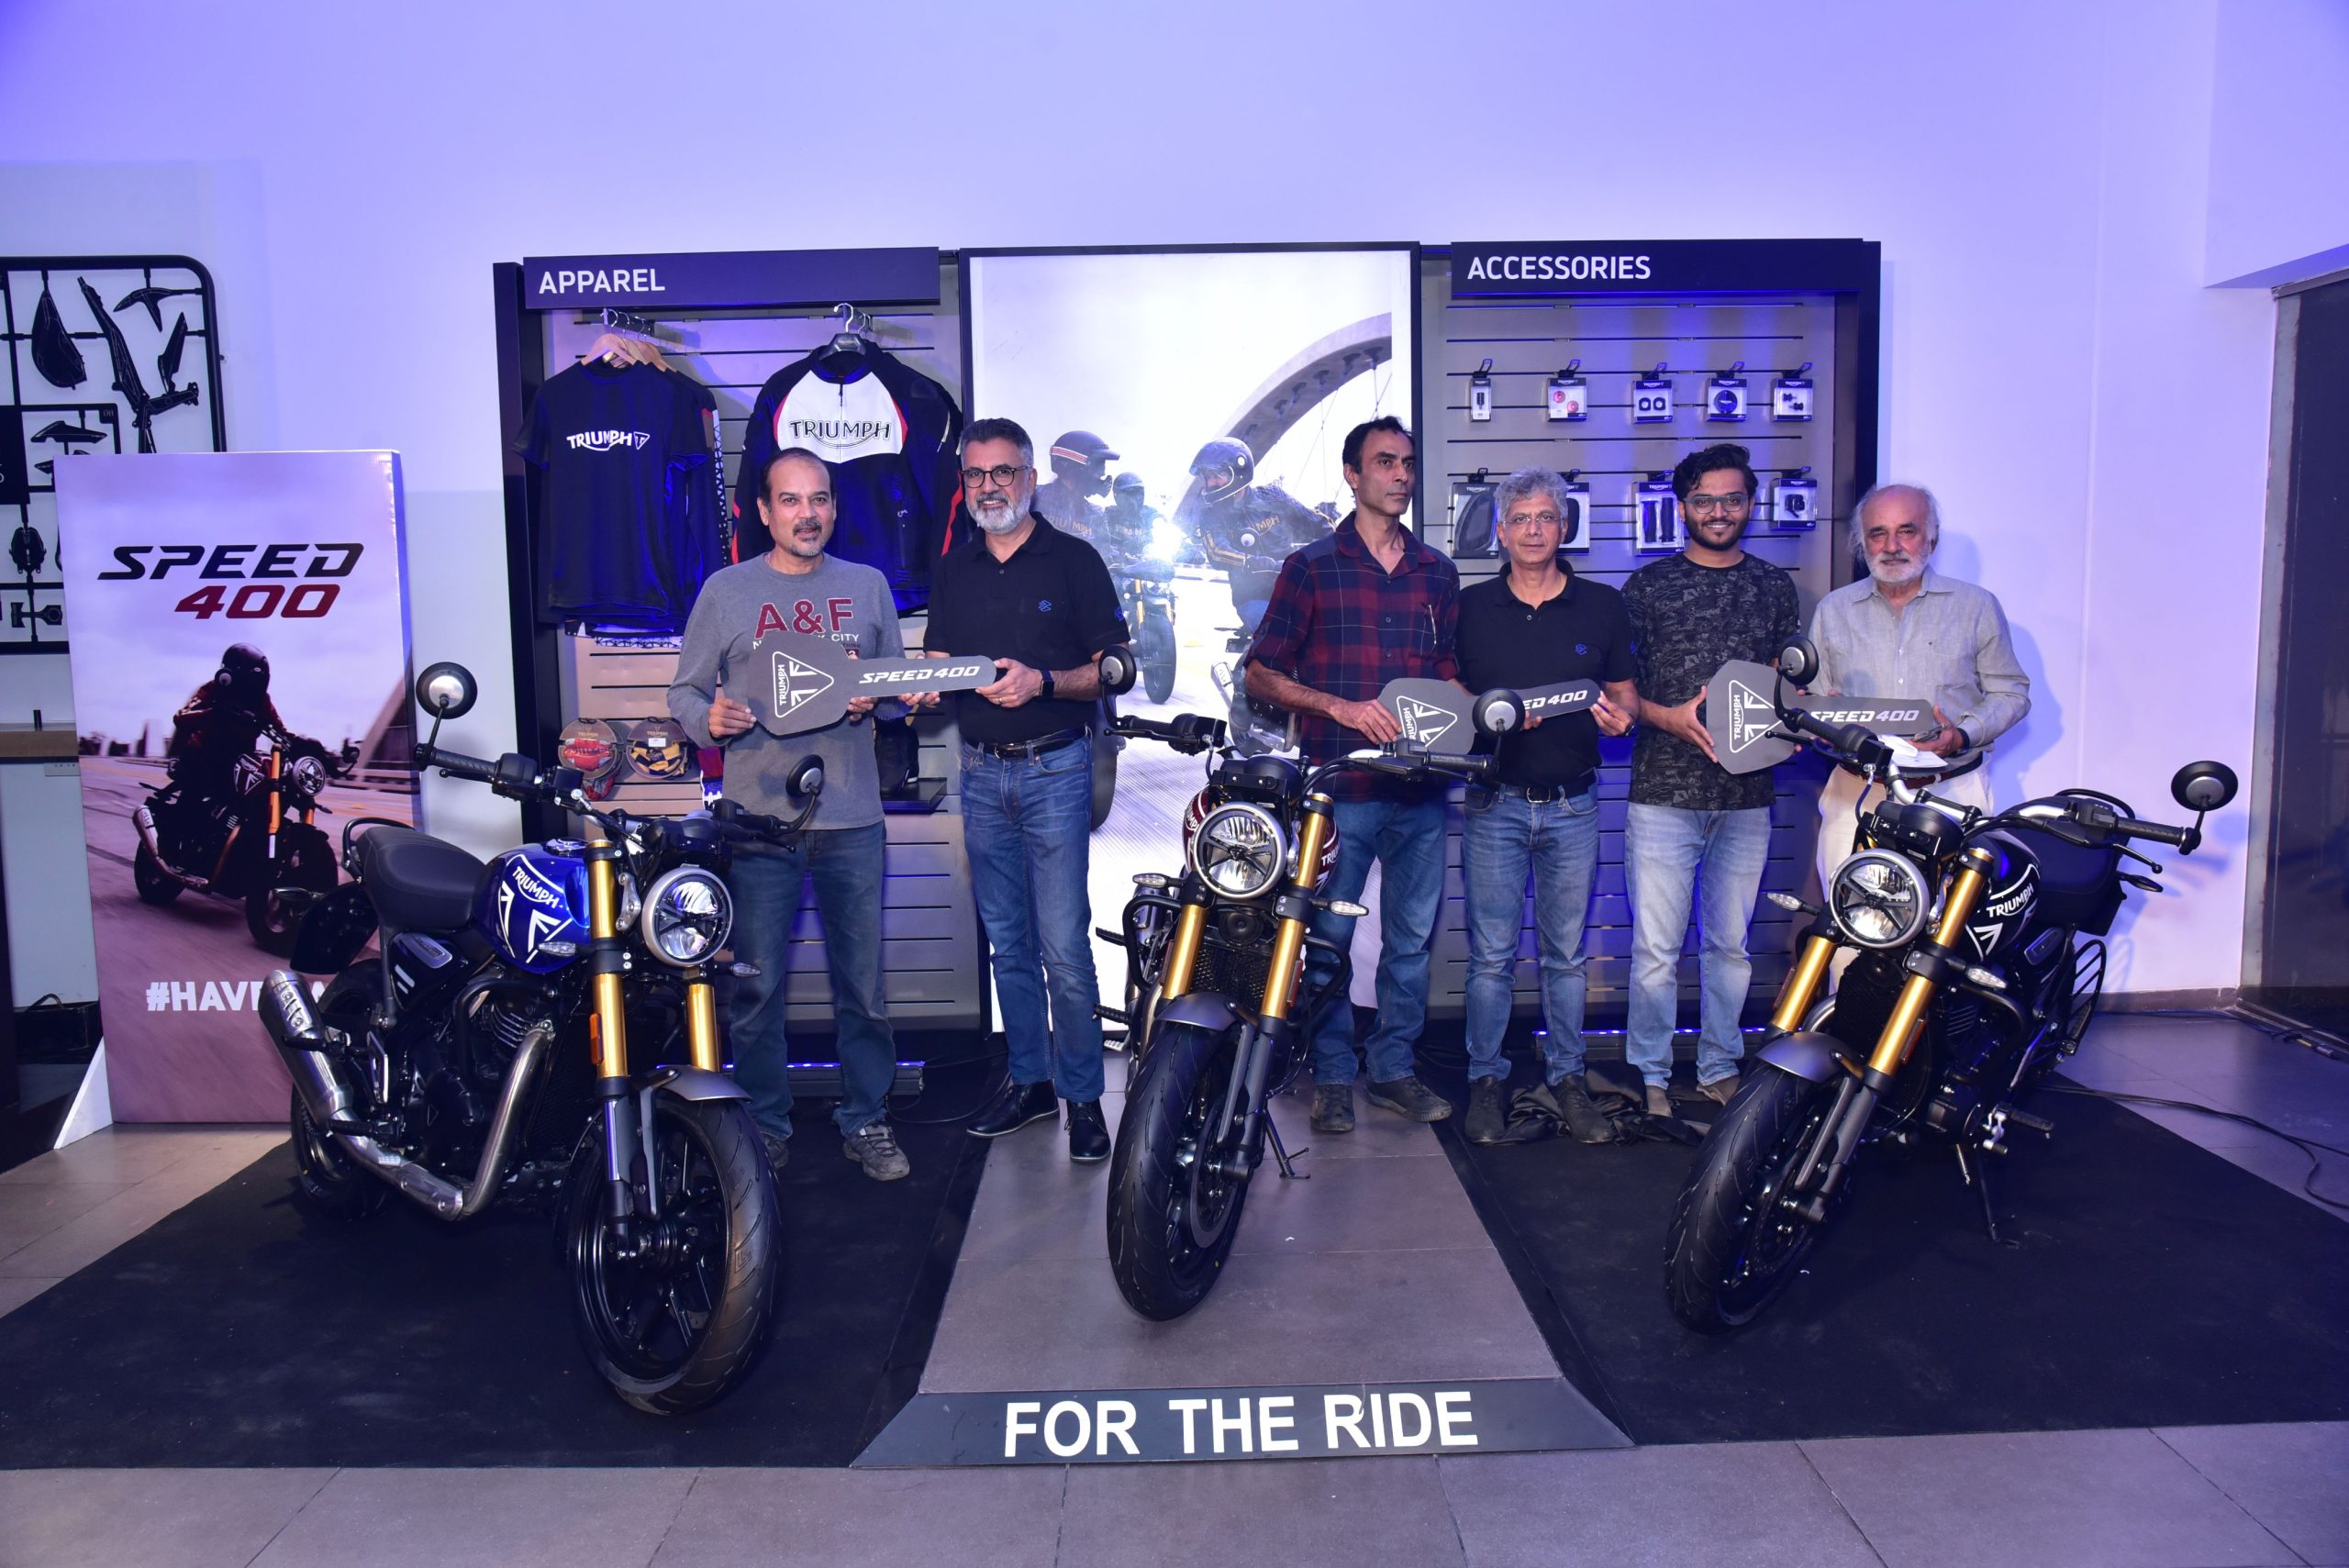 First Batch of Triumph Speed 400 Bikes Delivered in Pune - Motoarc ...